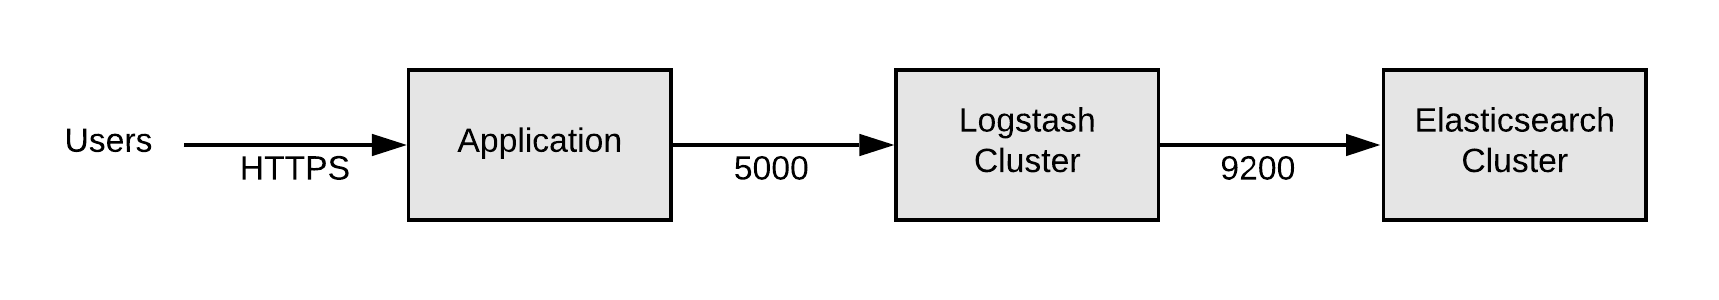 Diagram showing Application, Logstash and Elastic Search